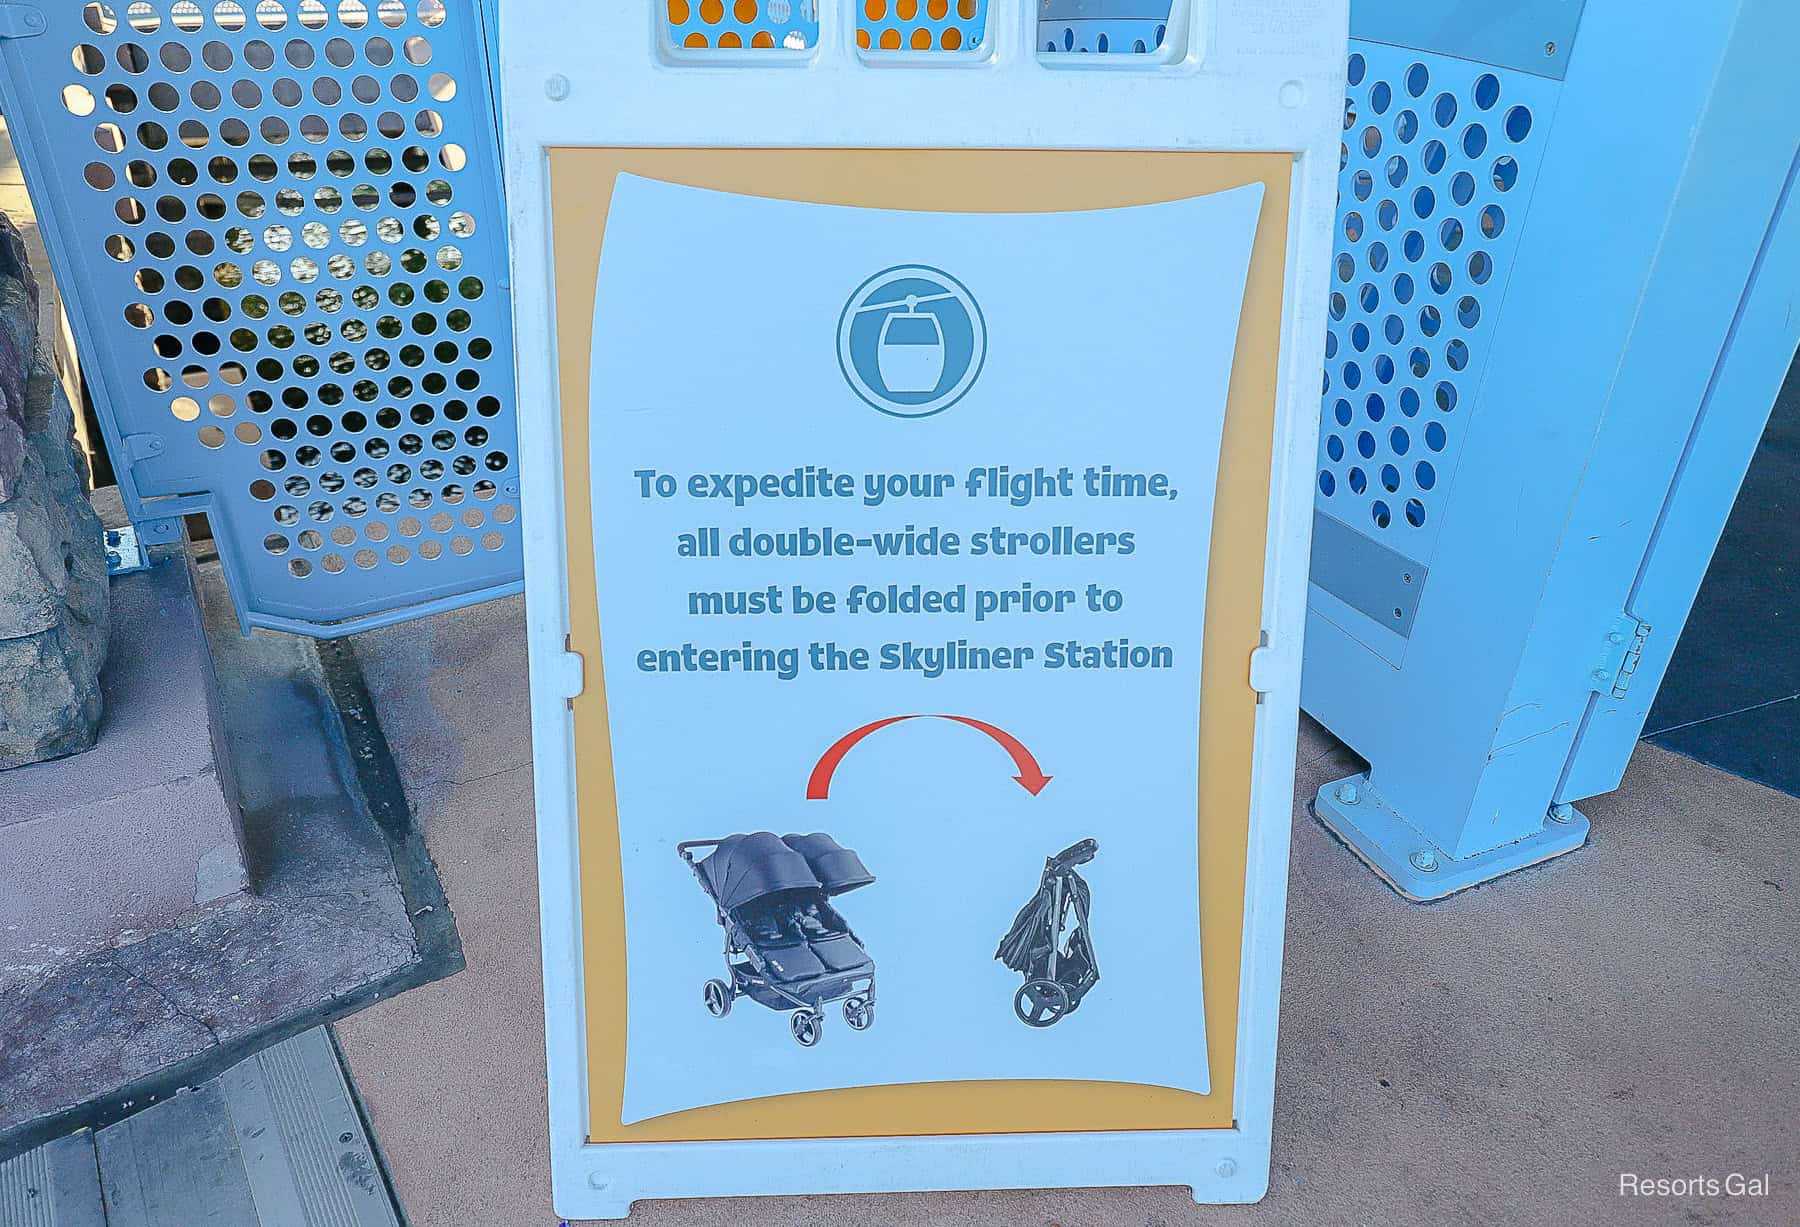 a sign that says "To Expedite Your Flight Time, all double wide strollers must be folded prior to entering the Skyliner Station." 